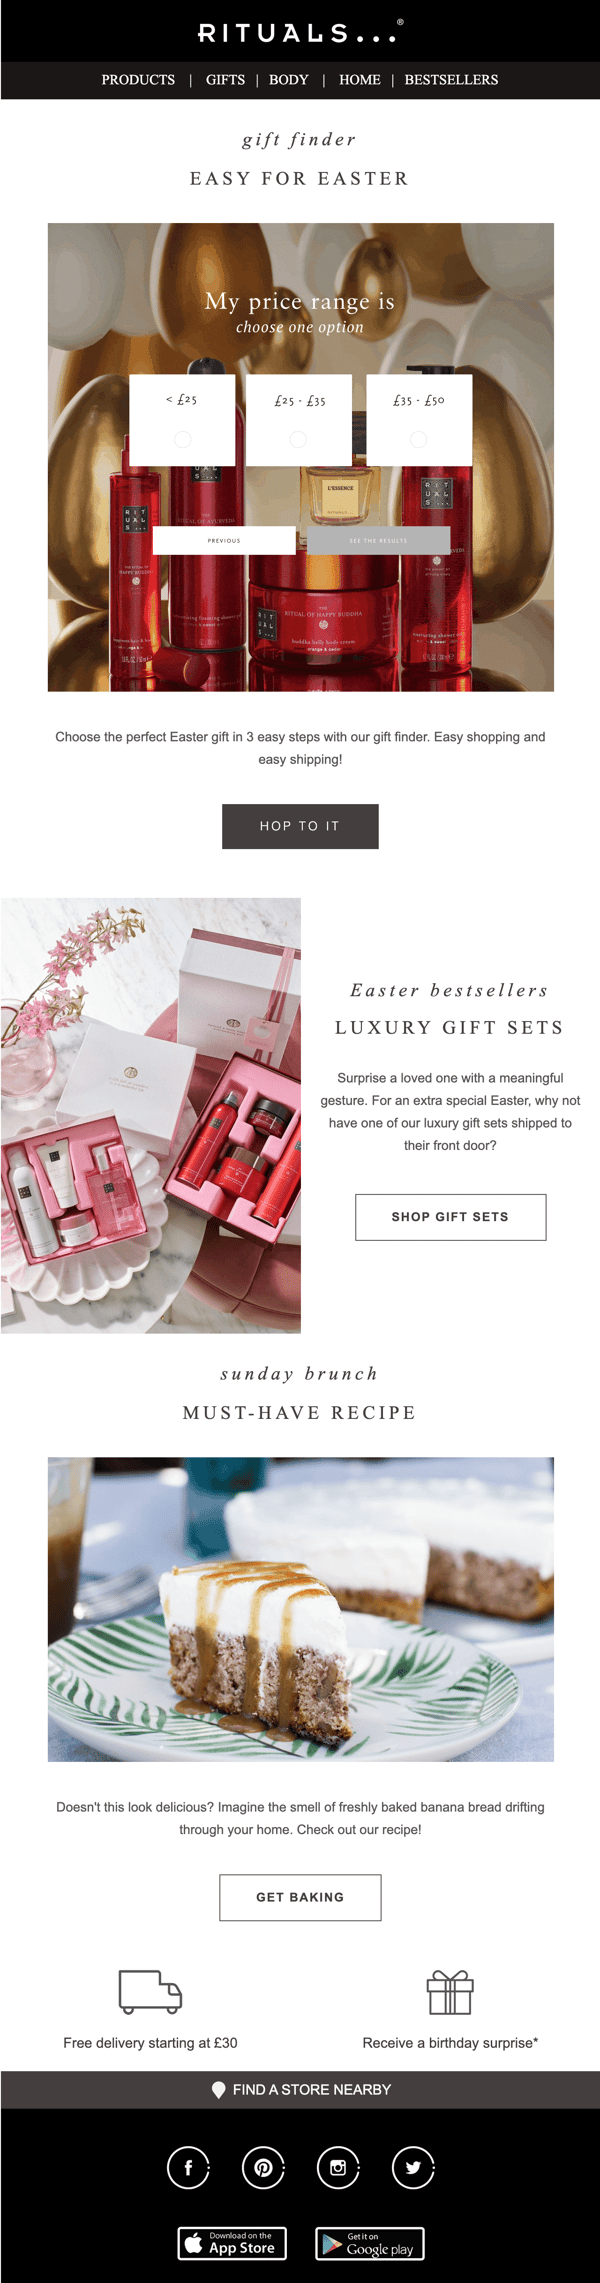 rituals-cosmetics-email-easter